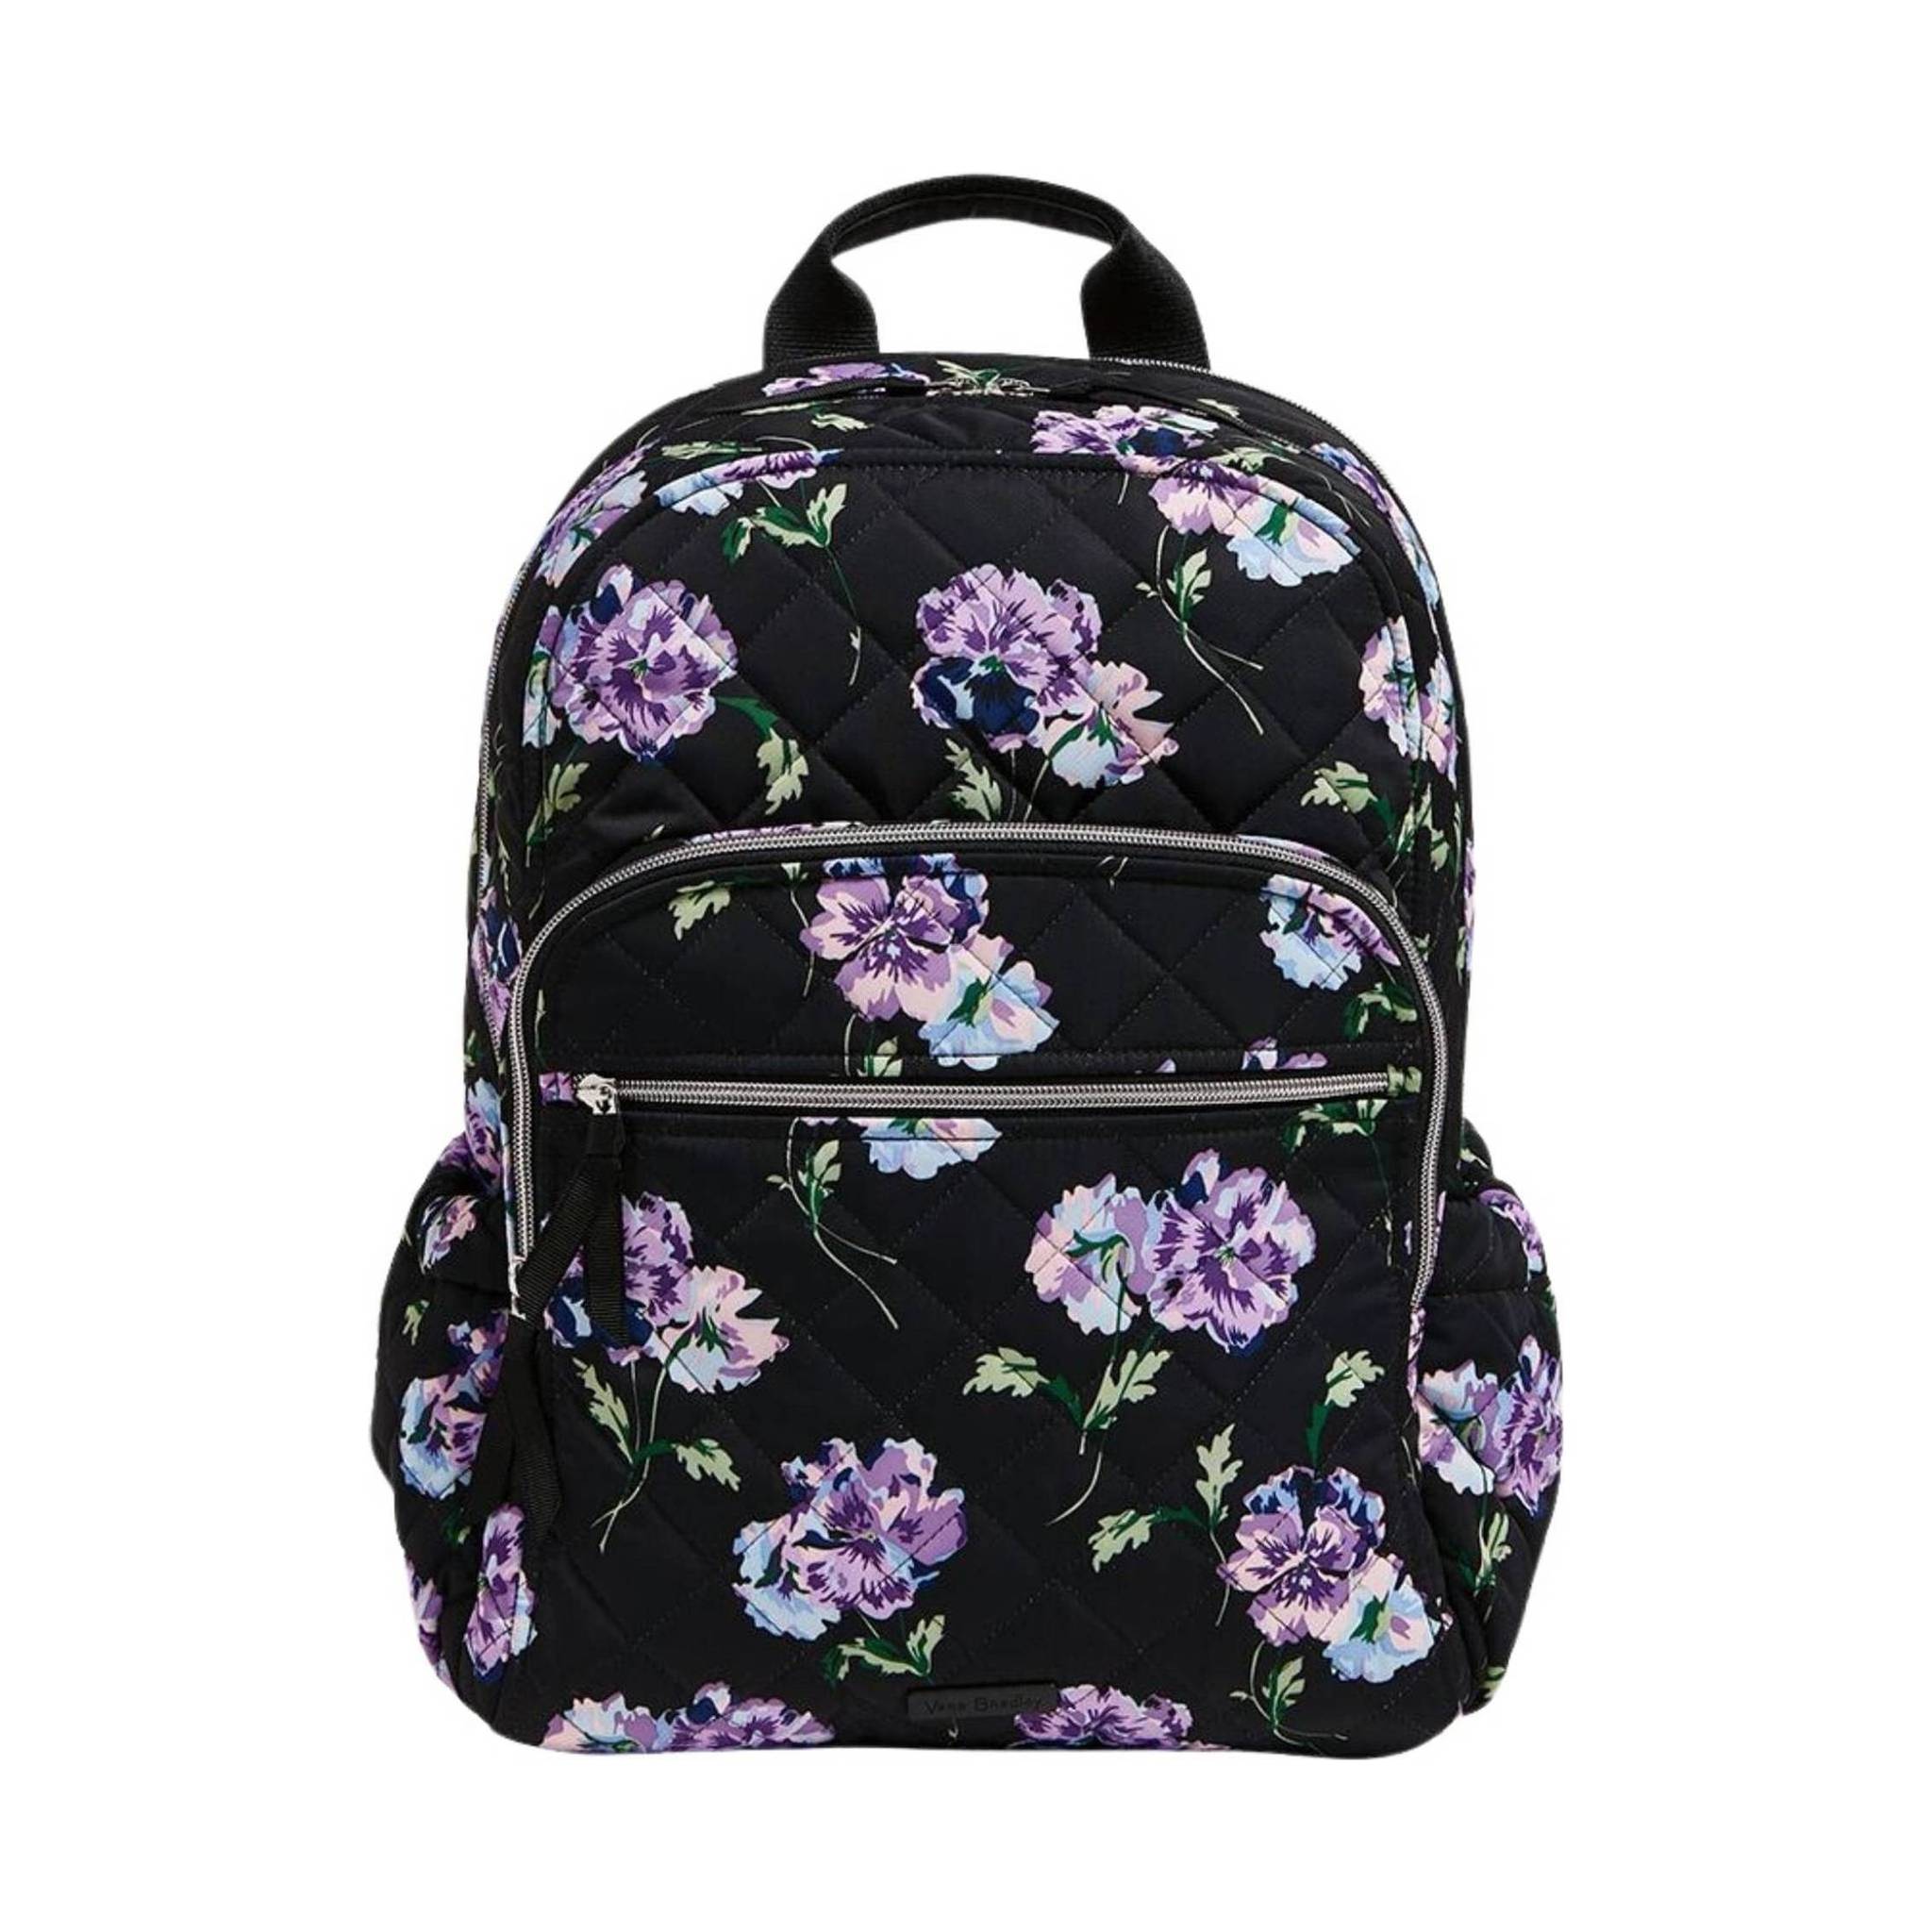 Vera Bradley - What do you use our Campus Backpack for? Work